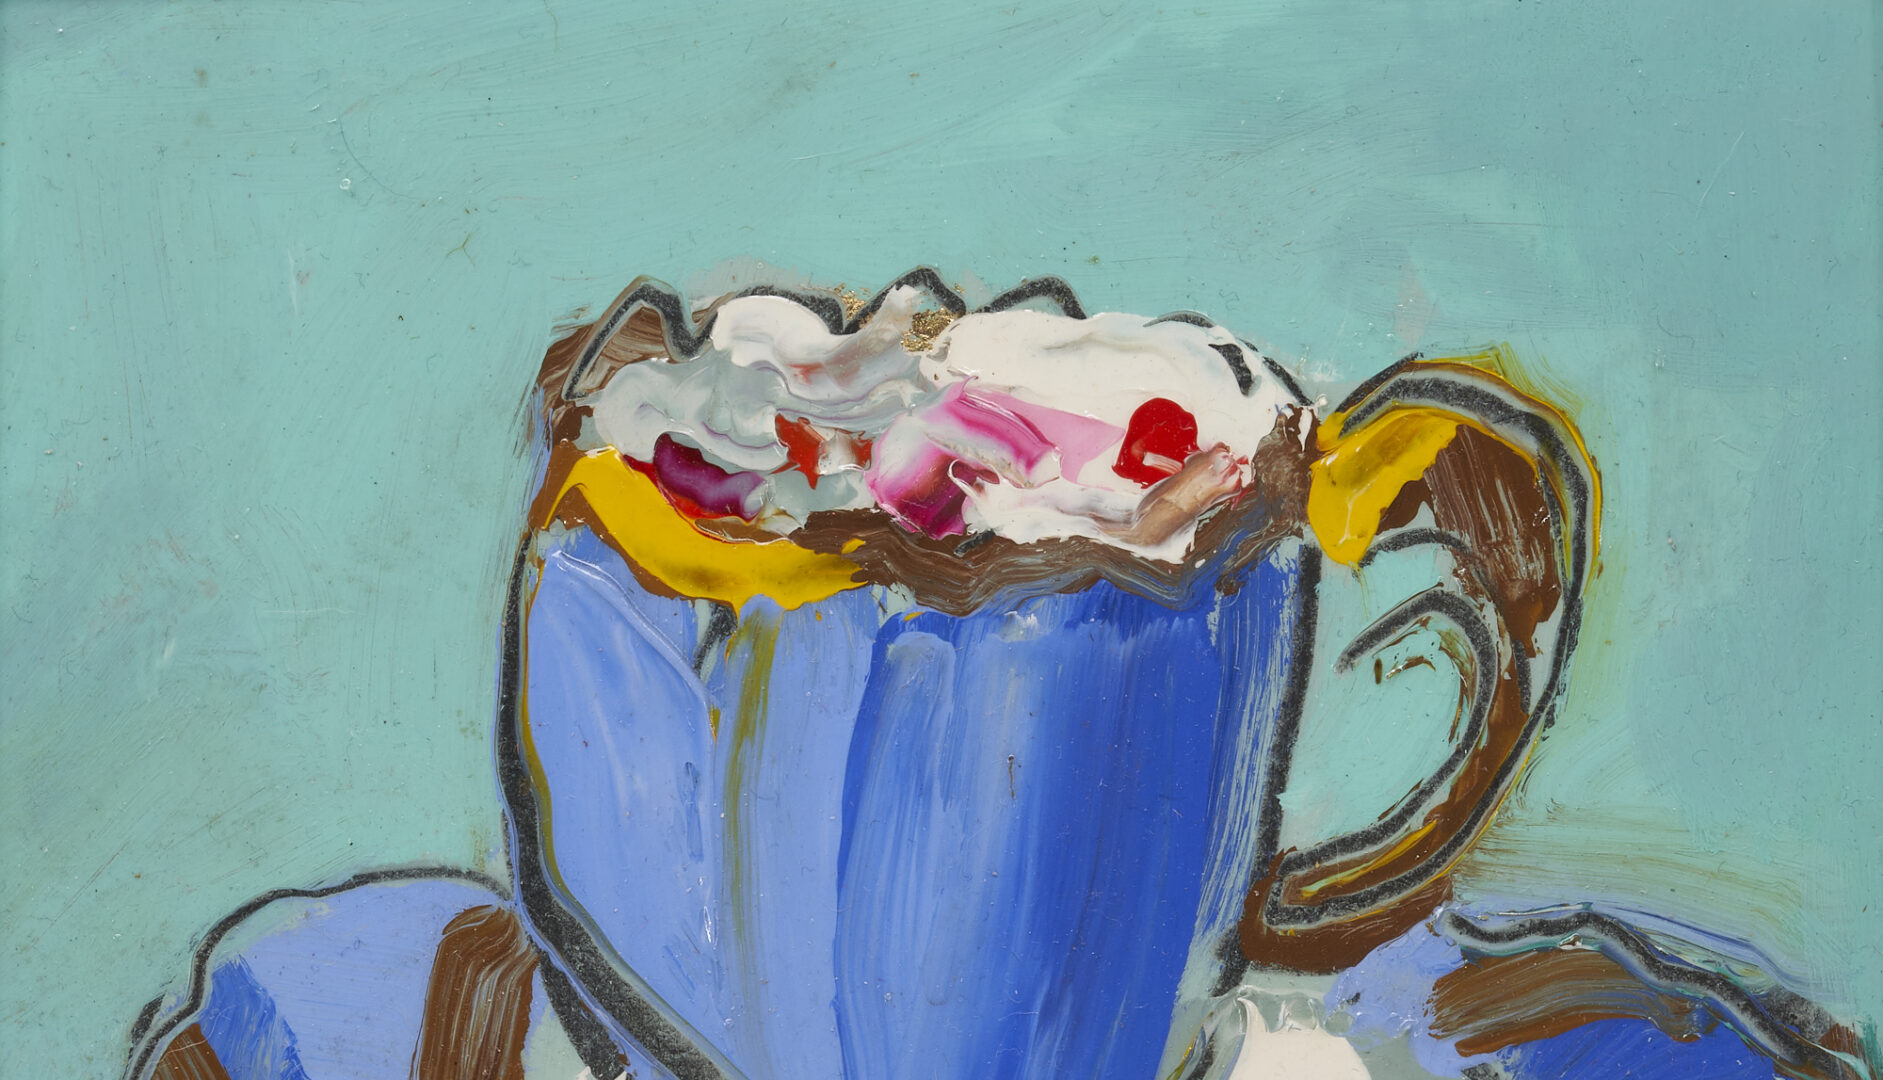 Lot 691: Harold Kraus Oil on Board, Cup and Saucer